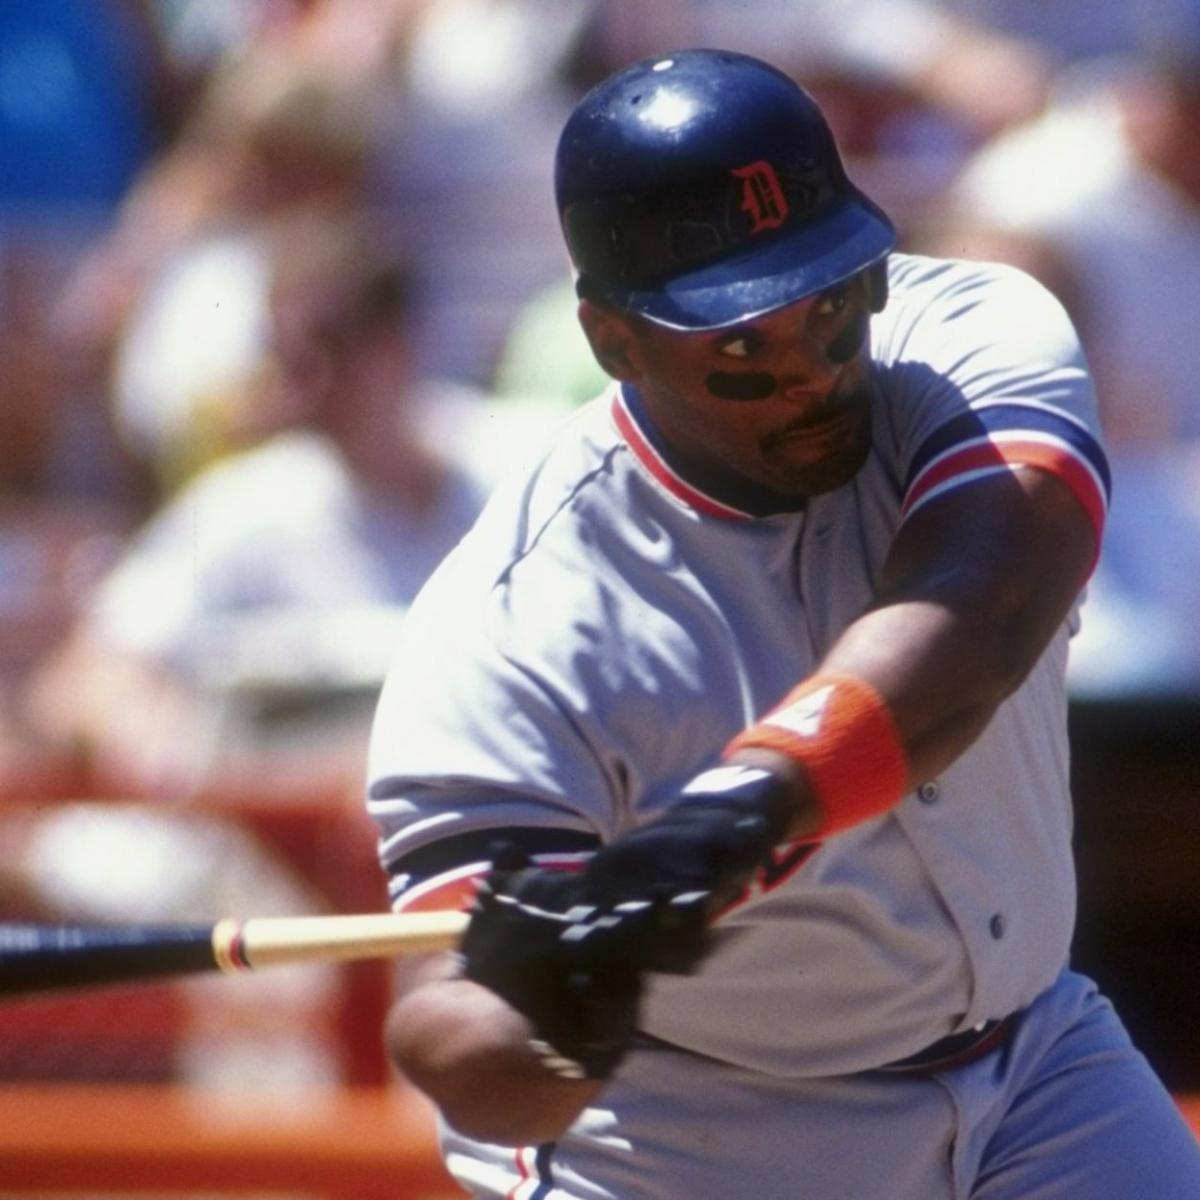 Cecil Fielder on his son Prince: I think we're all a little disappointed  - NBC Sports